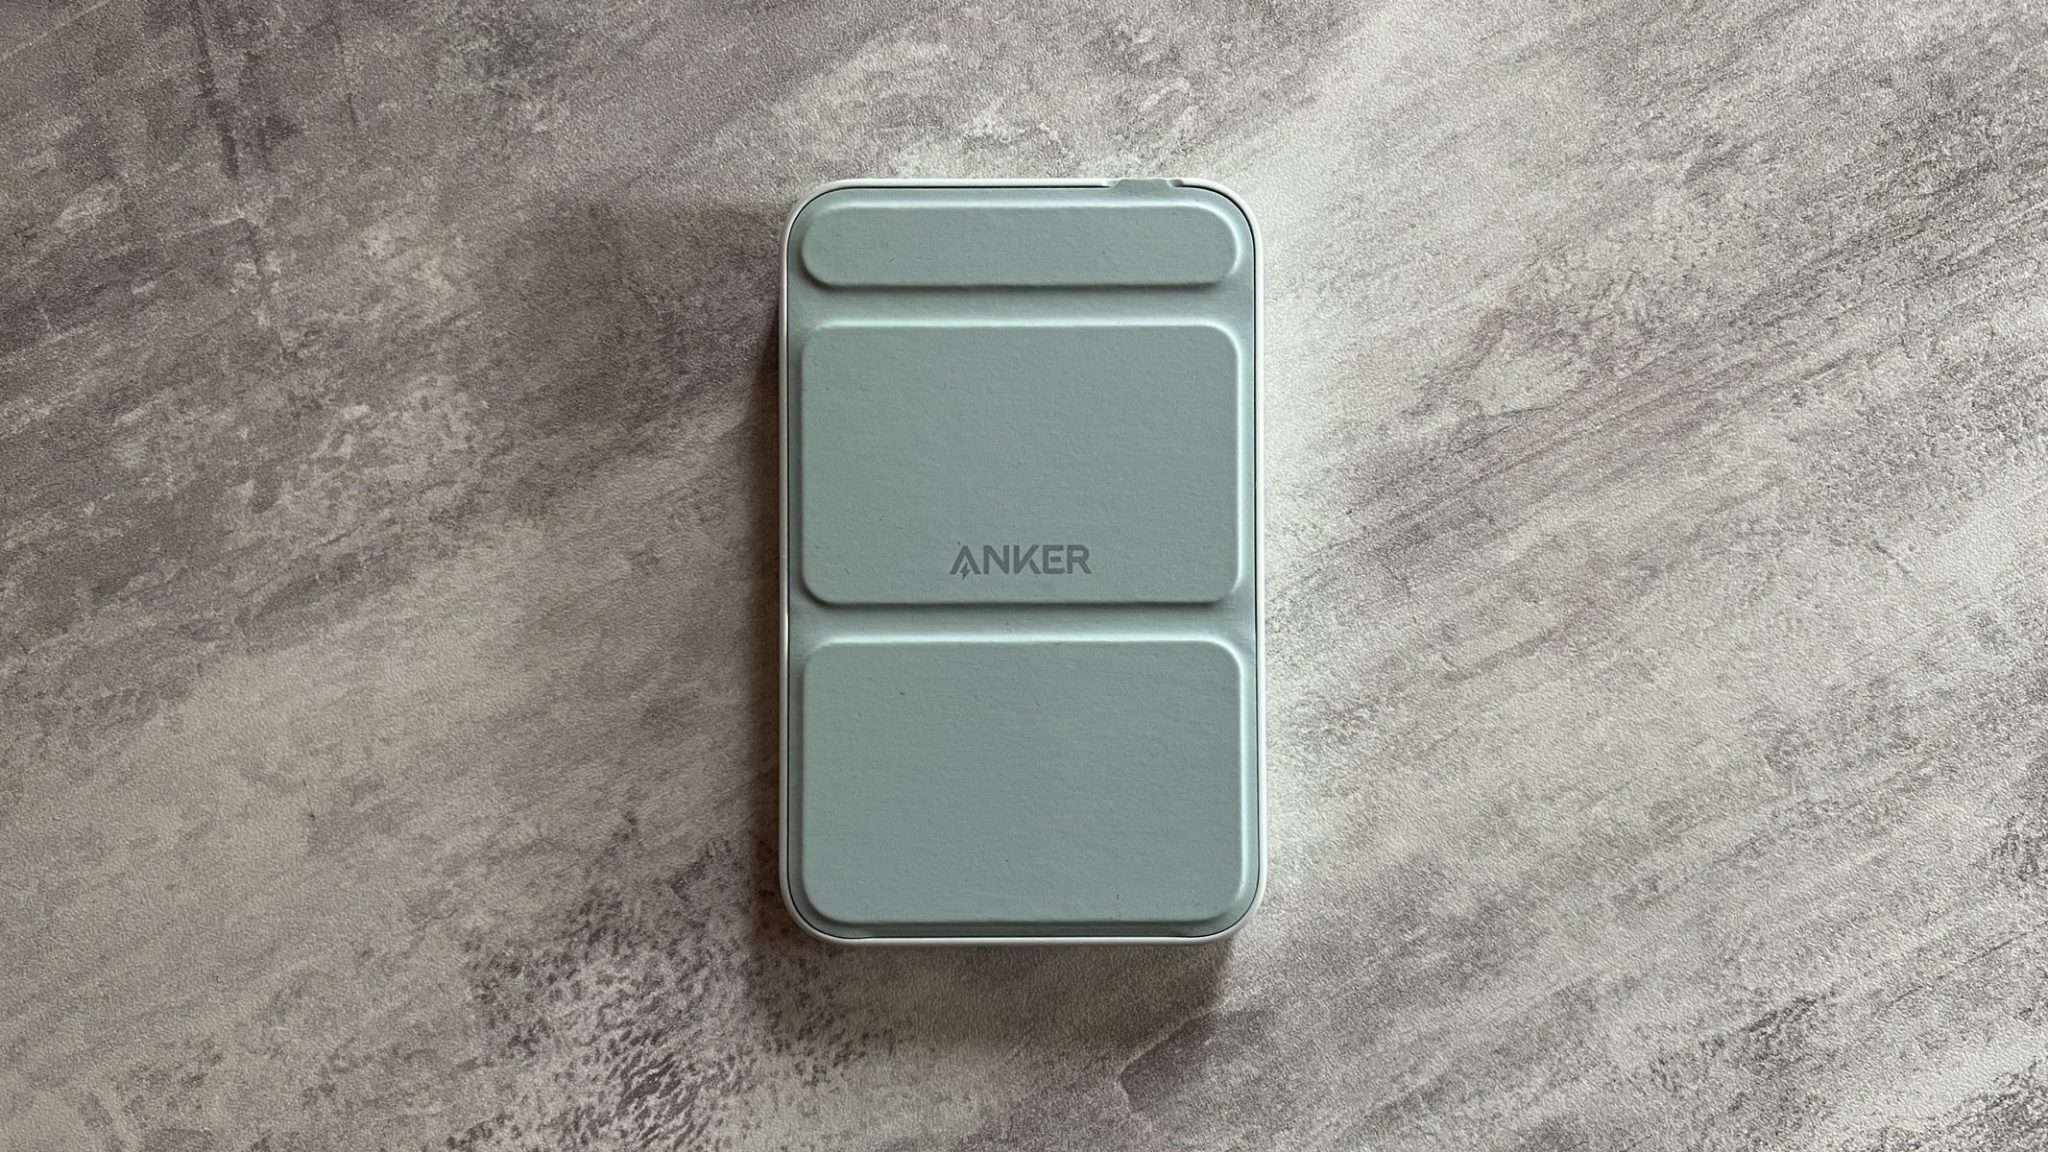 Anker 622 Magnetic Battery (MagGo) review: power bank made easy